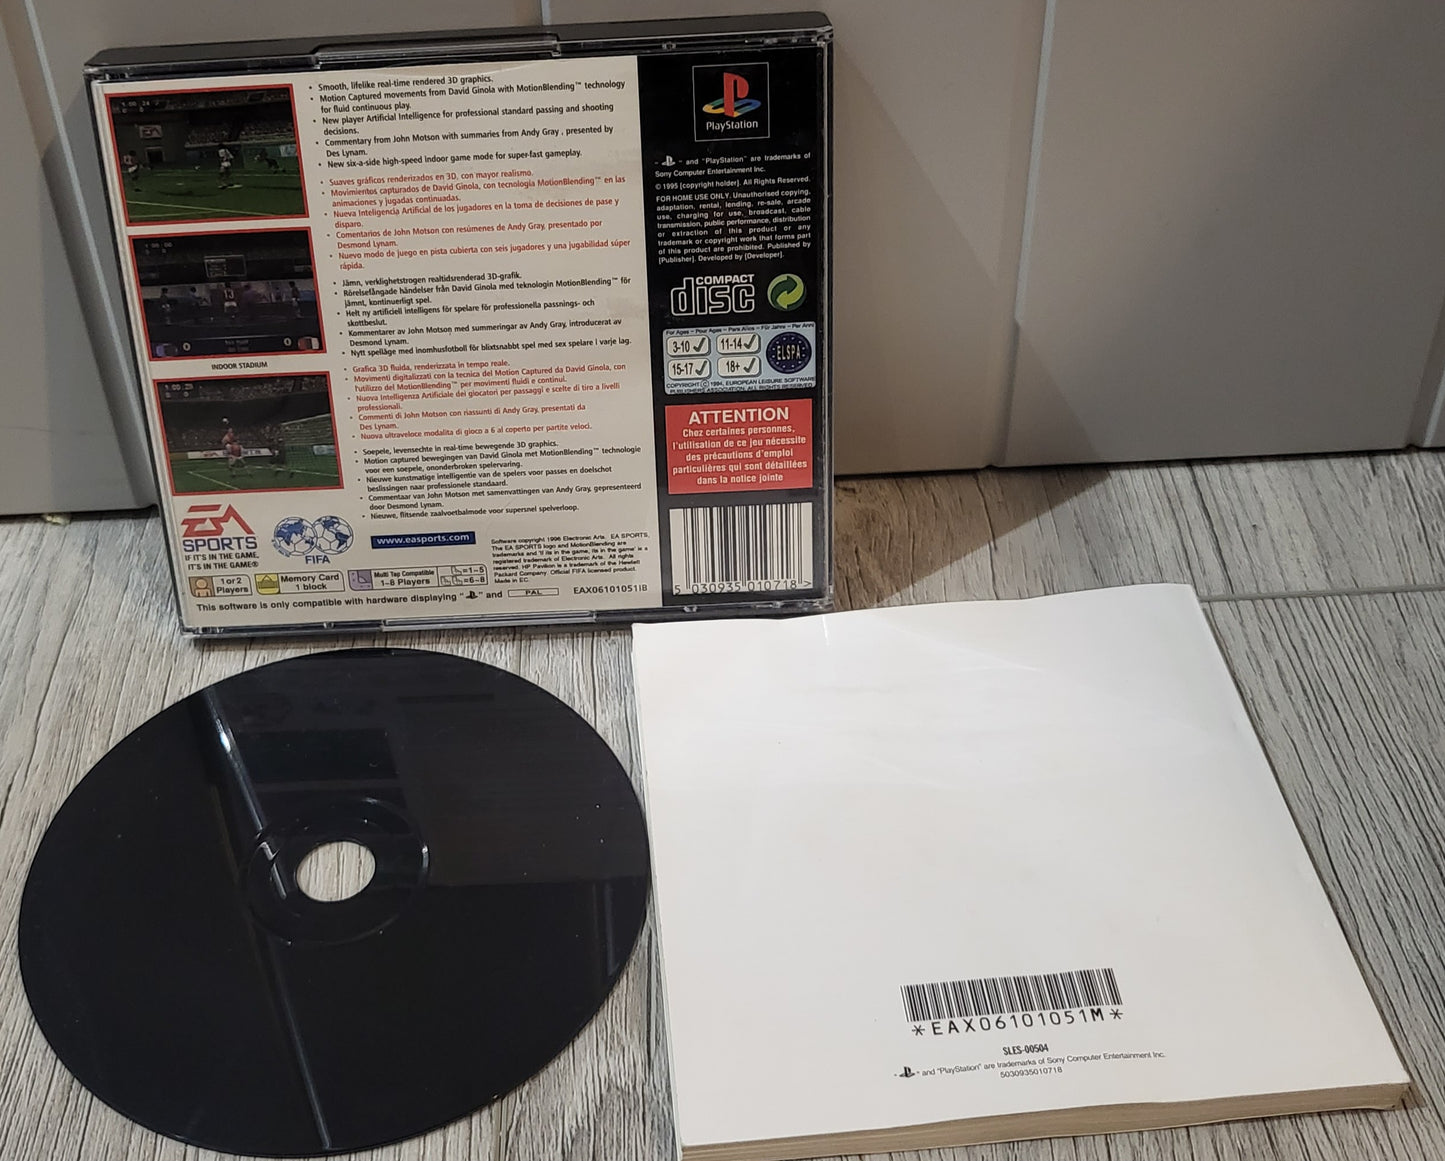 Fifa 97 Sony Playstation 1 (PS1) Game